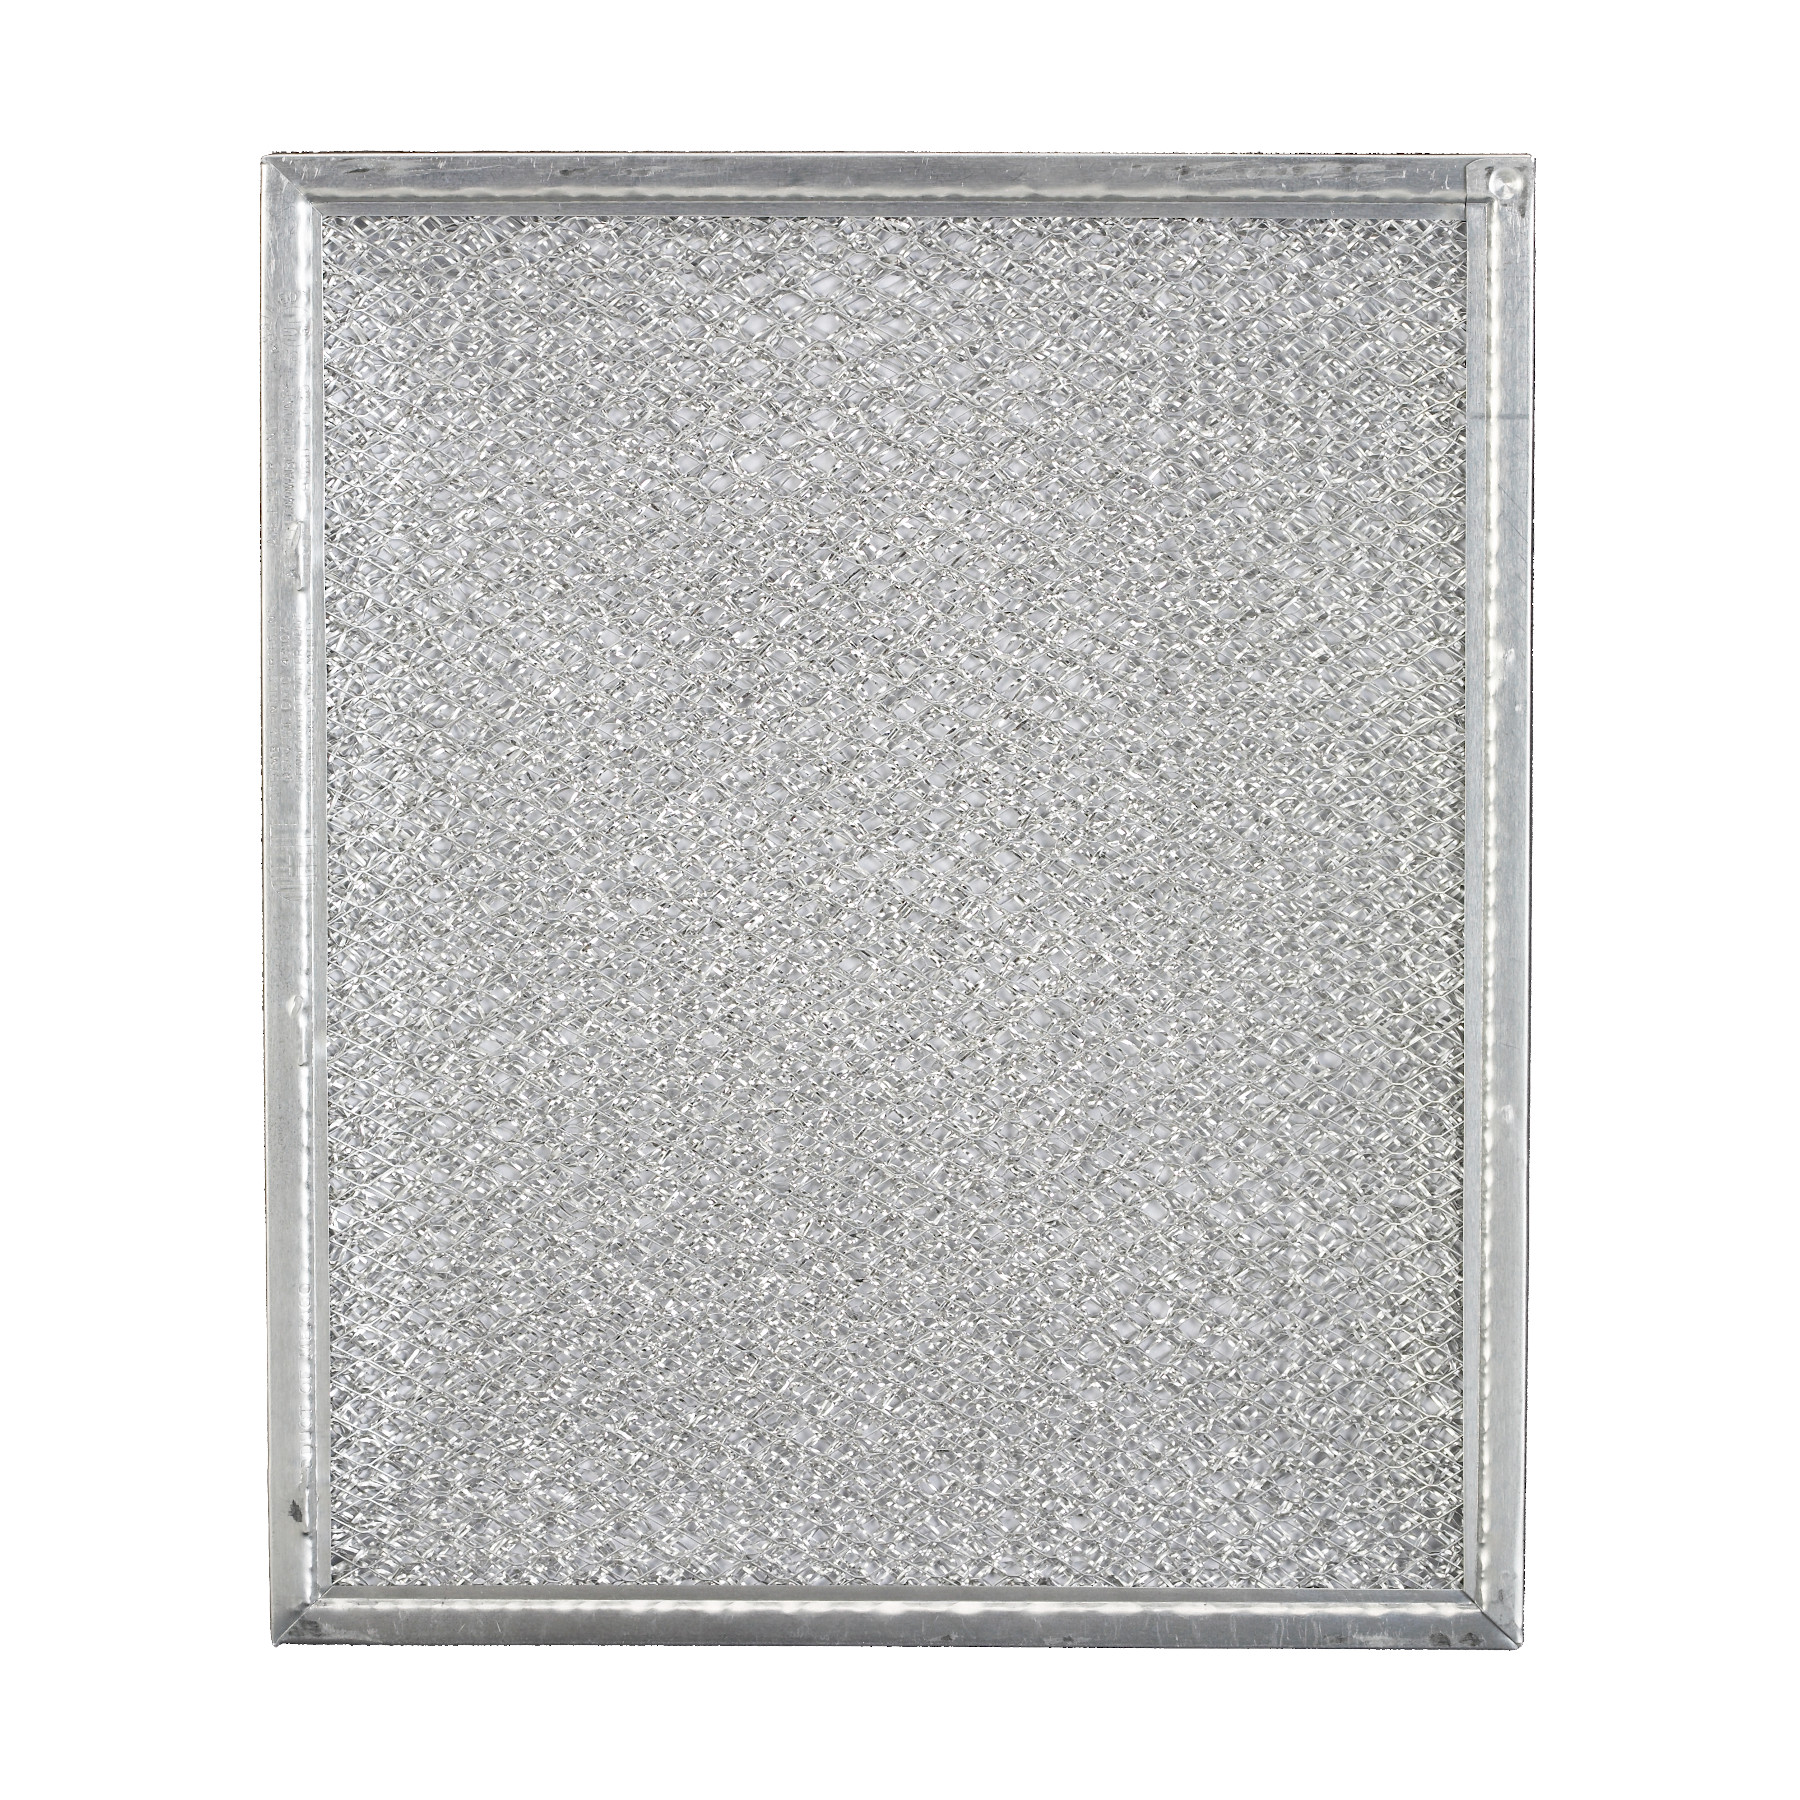 Broan-NuTone® Genuine Replacement Aluminum Filter for Range Hoods, 8" X 9-1/2", Fits Select Models